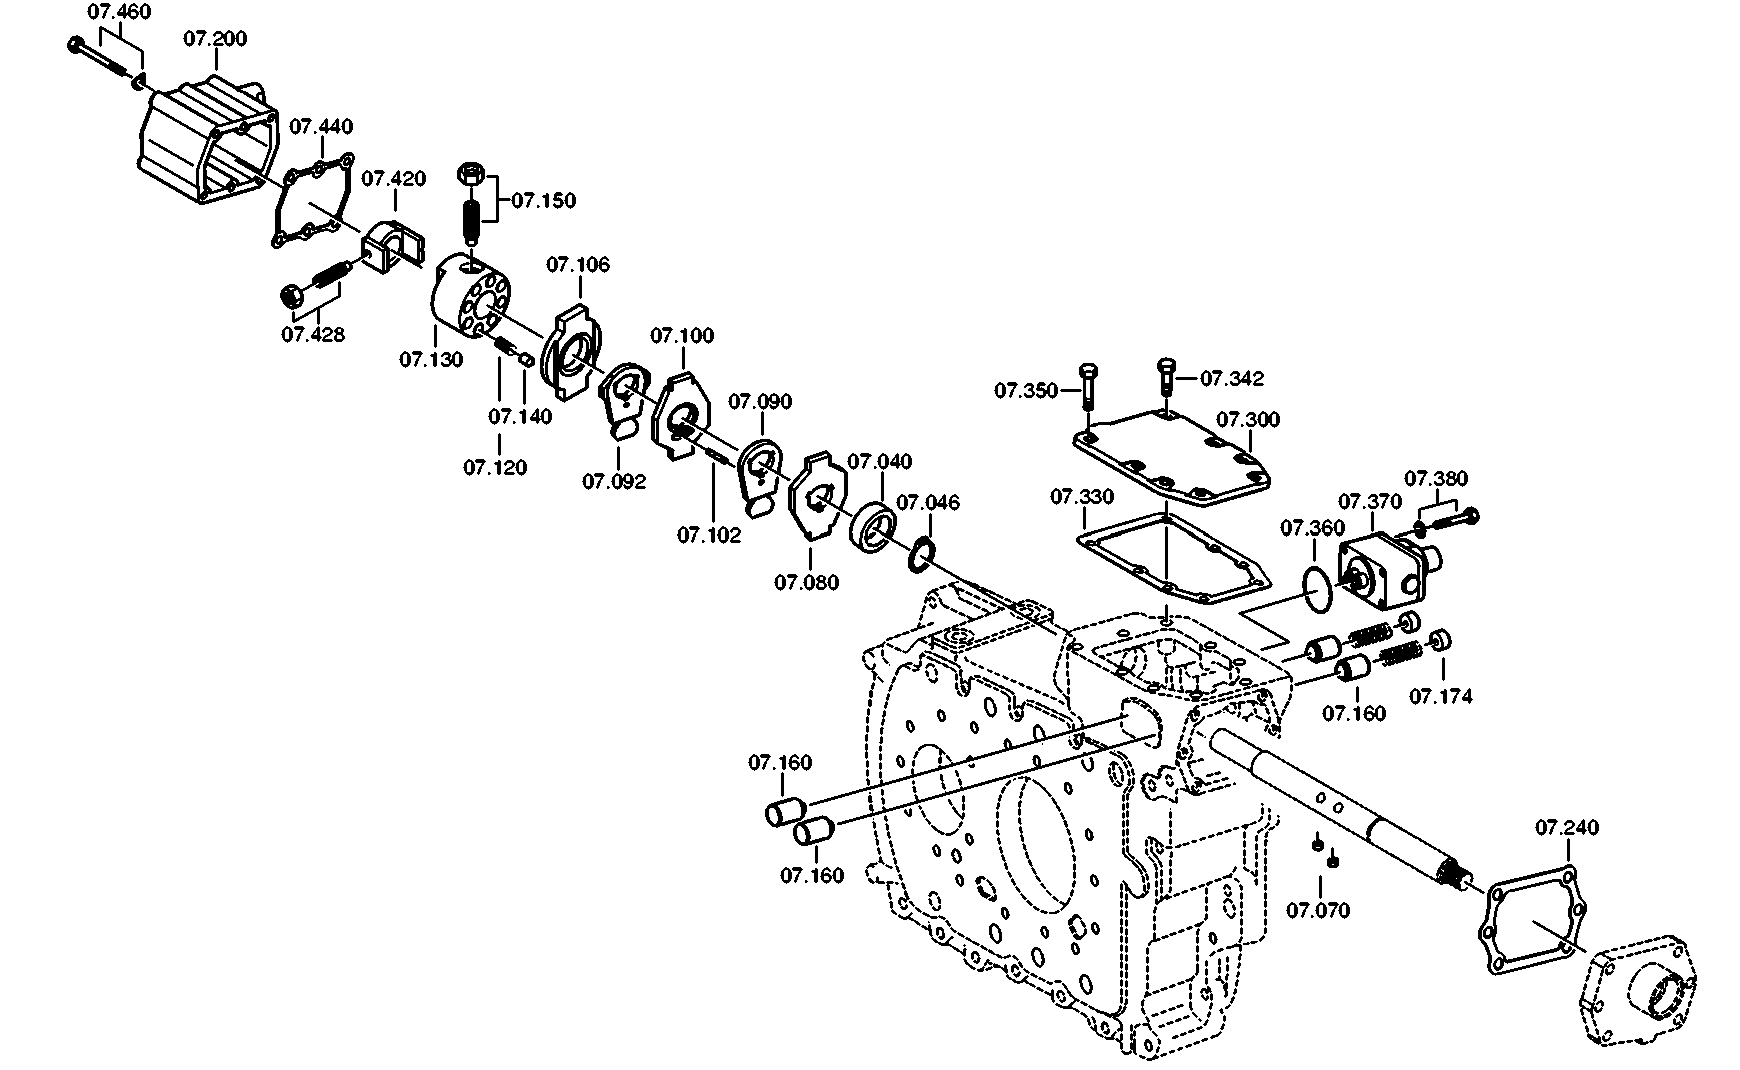 drawing for DAF 692183 - CUT-OFF VALVE (figure 4)